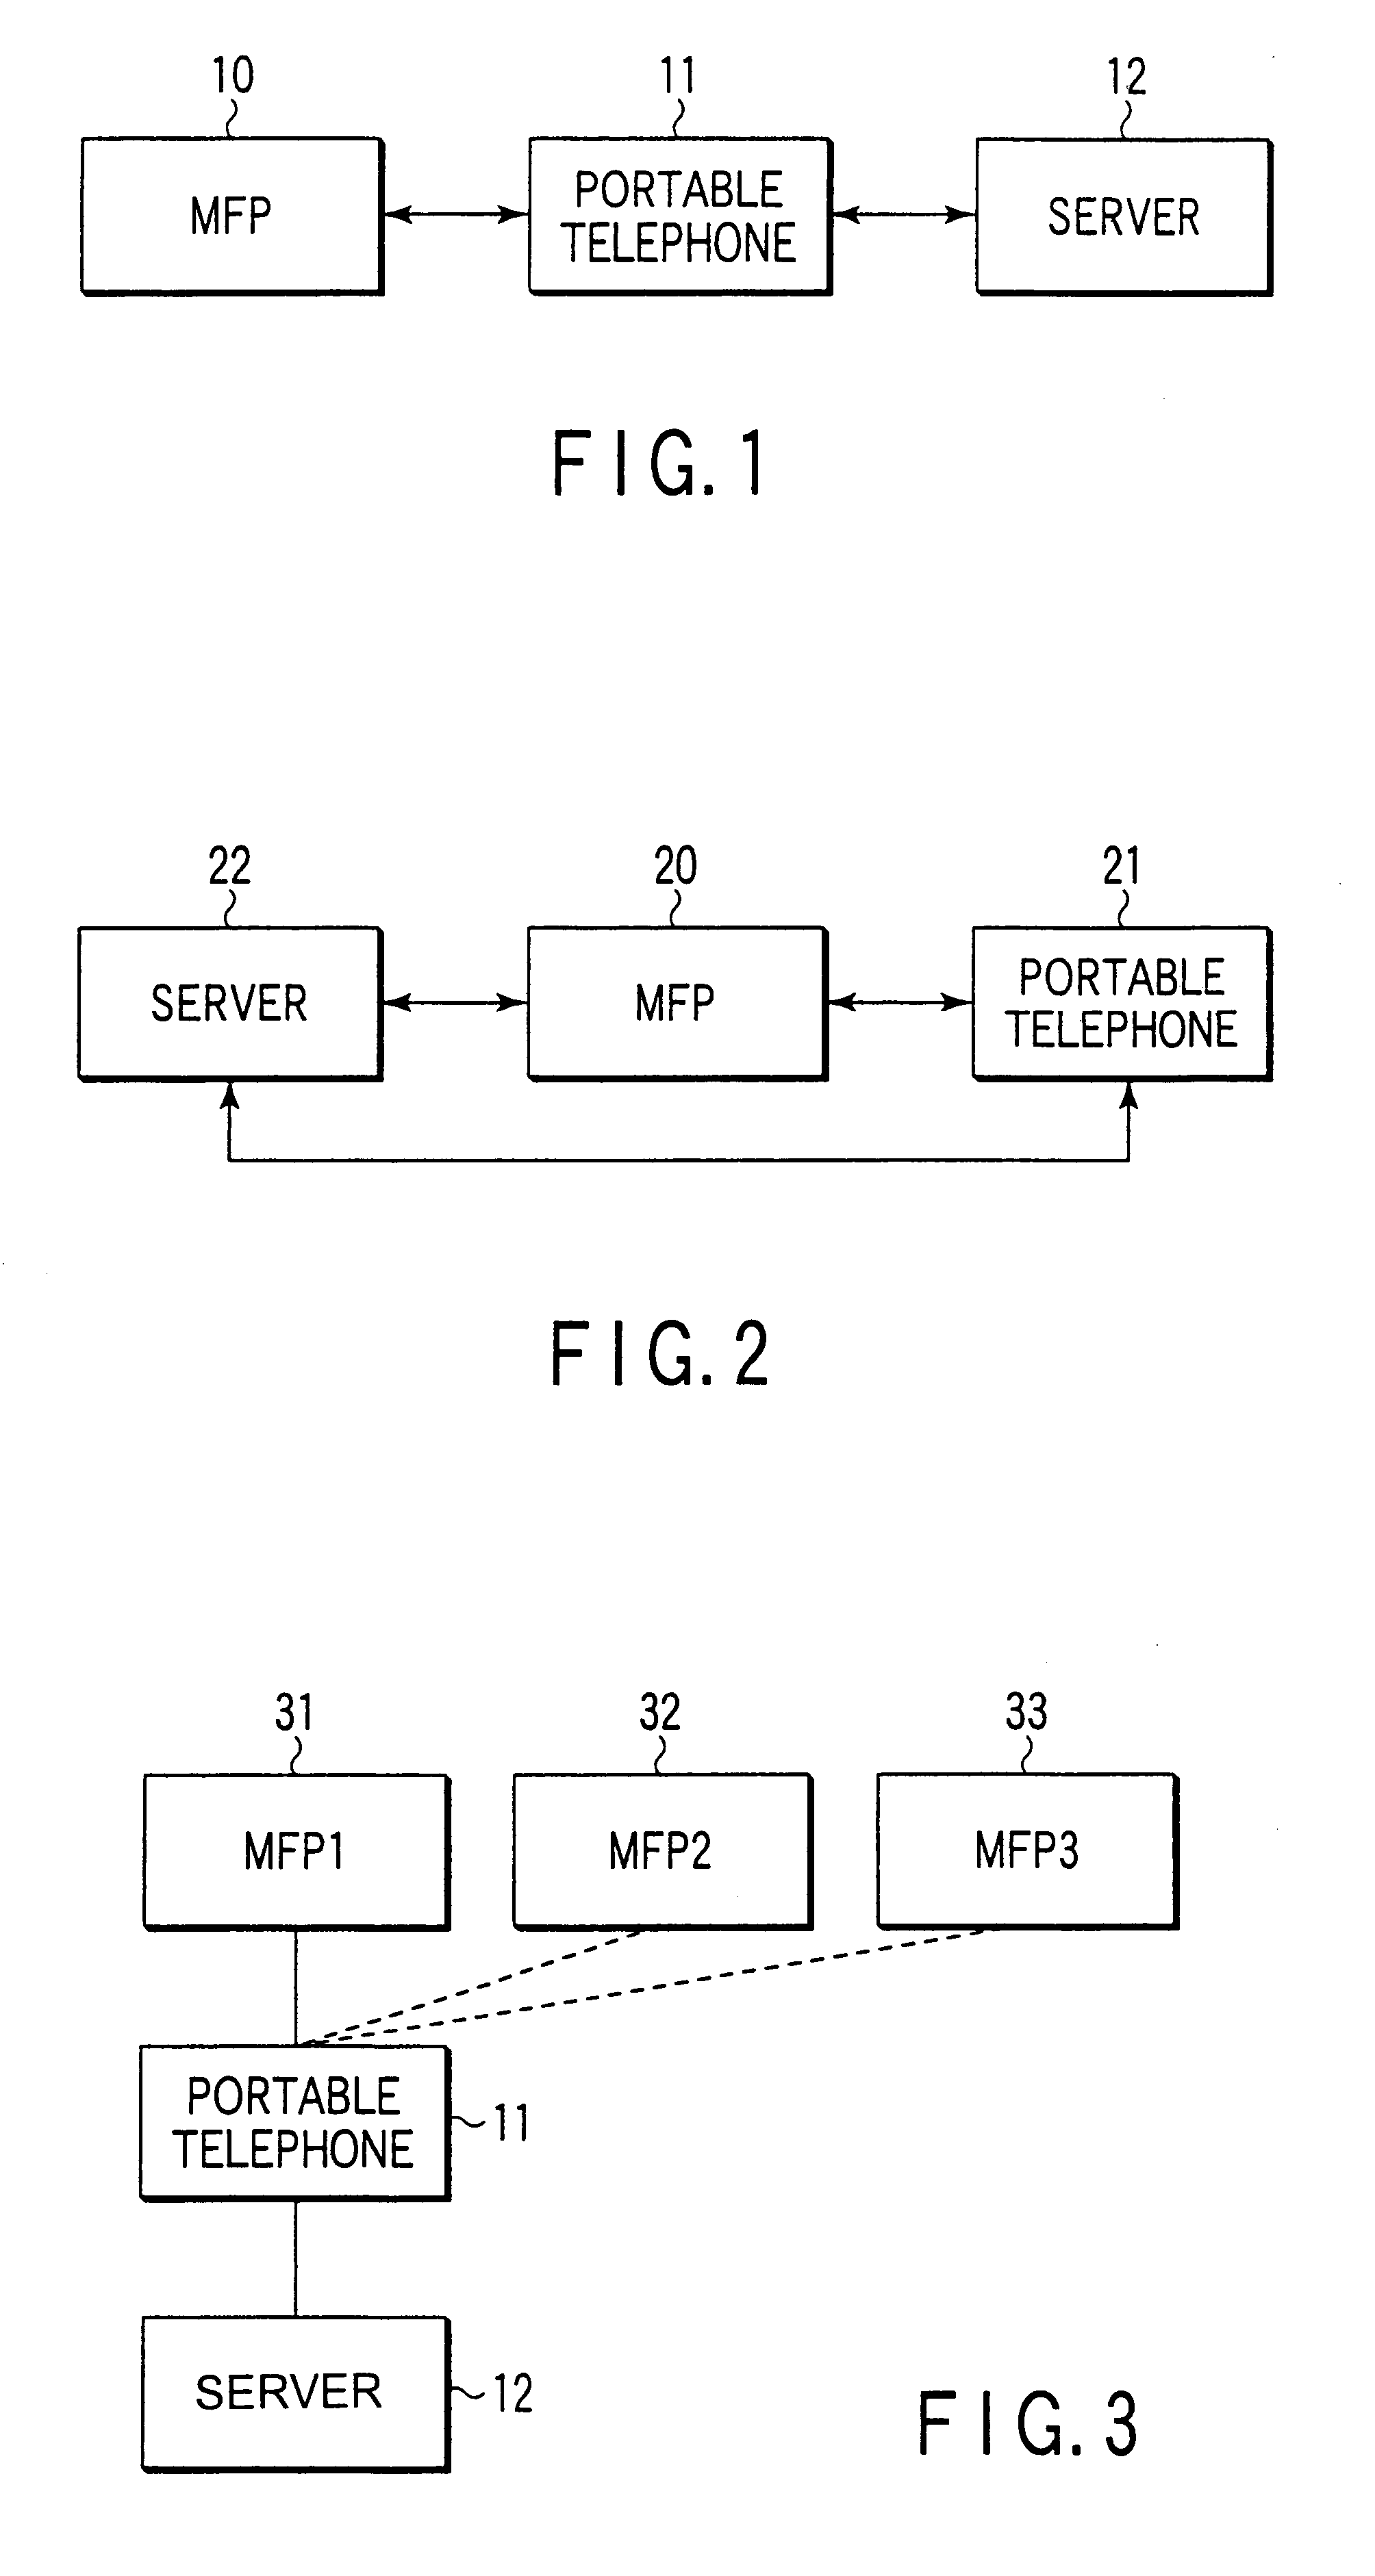 Image processing system that communicates with a portable device having user information